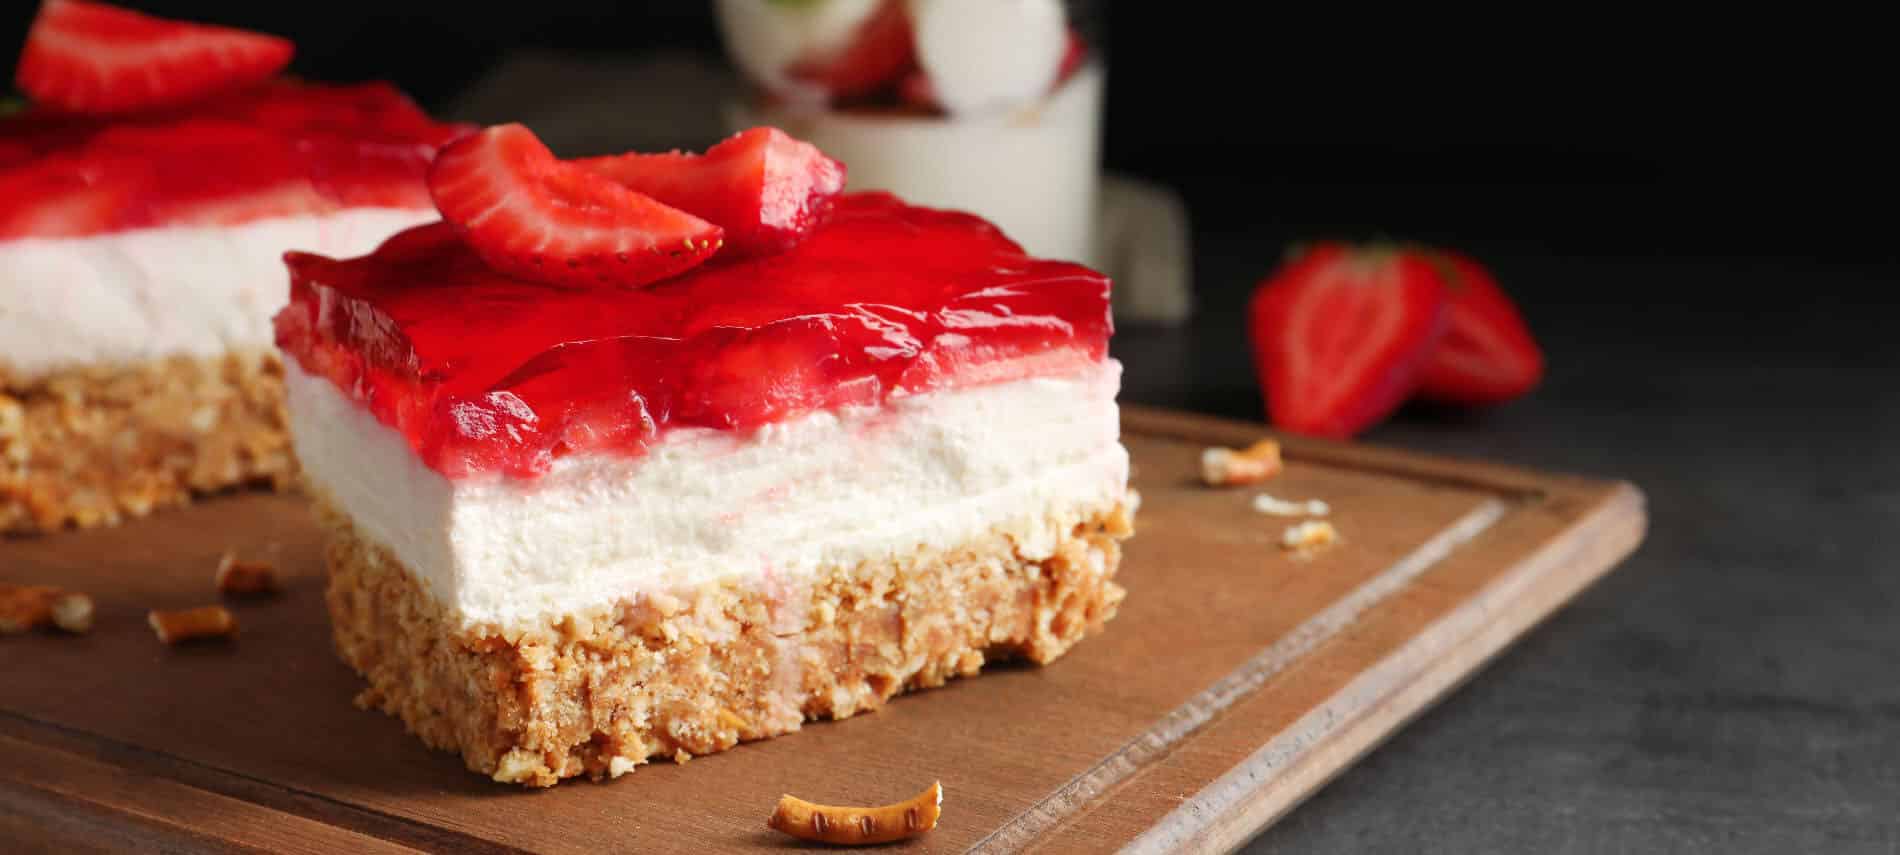 layered strawberry dessert with a pretzel crumb crust, cream filling, and red strawberry jello toppiing